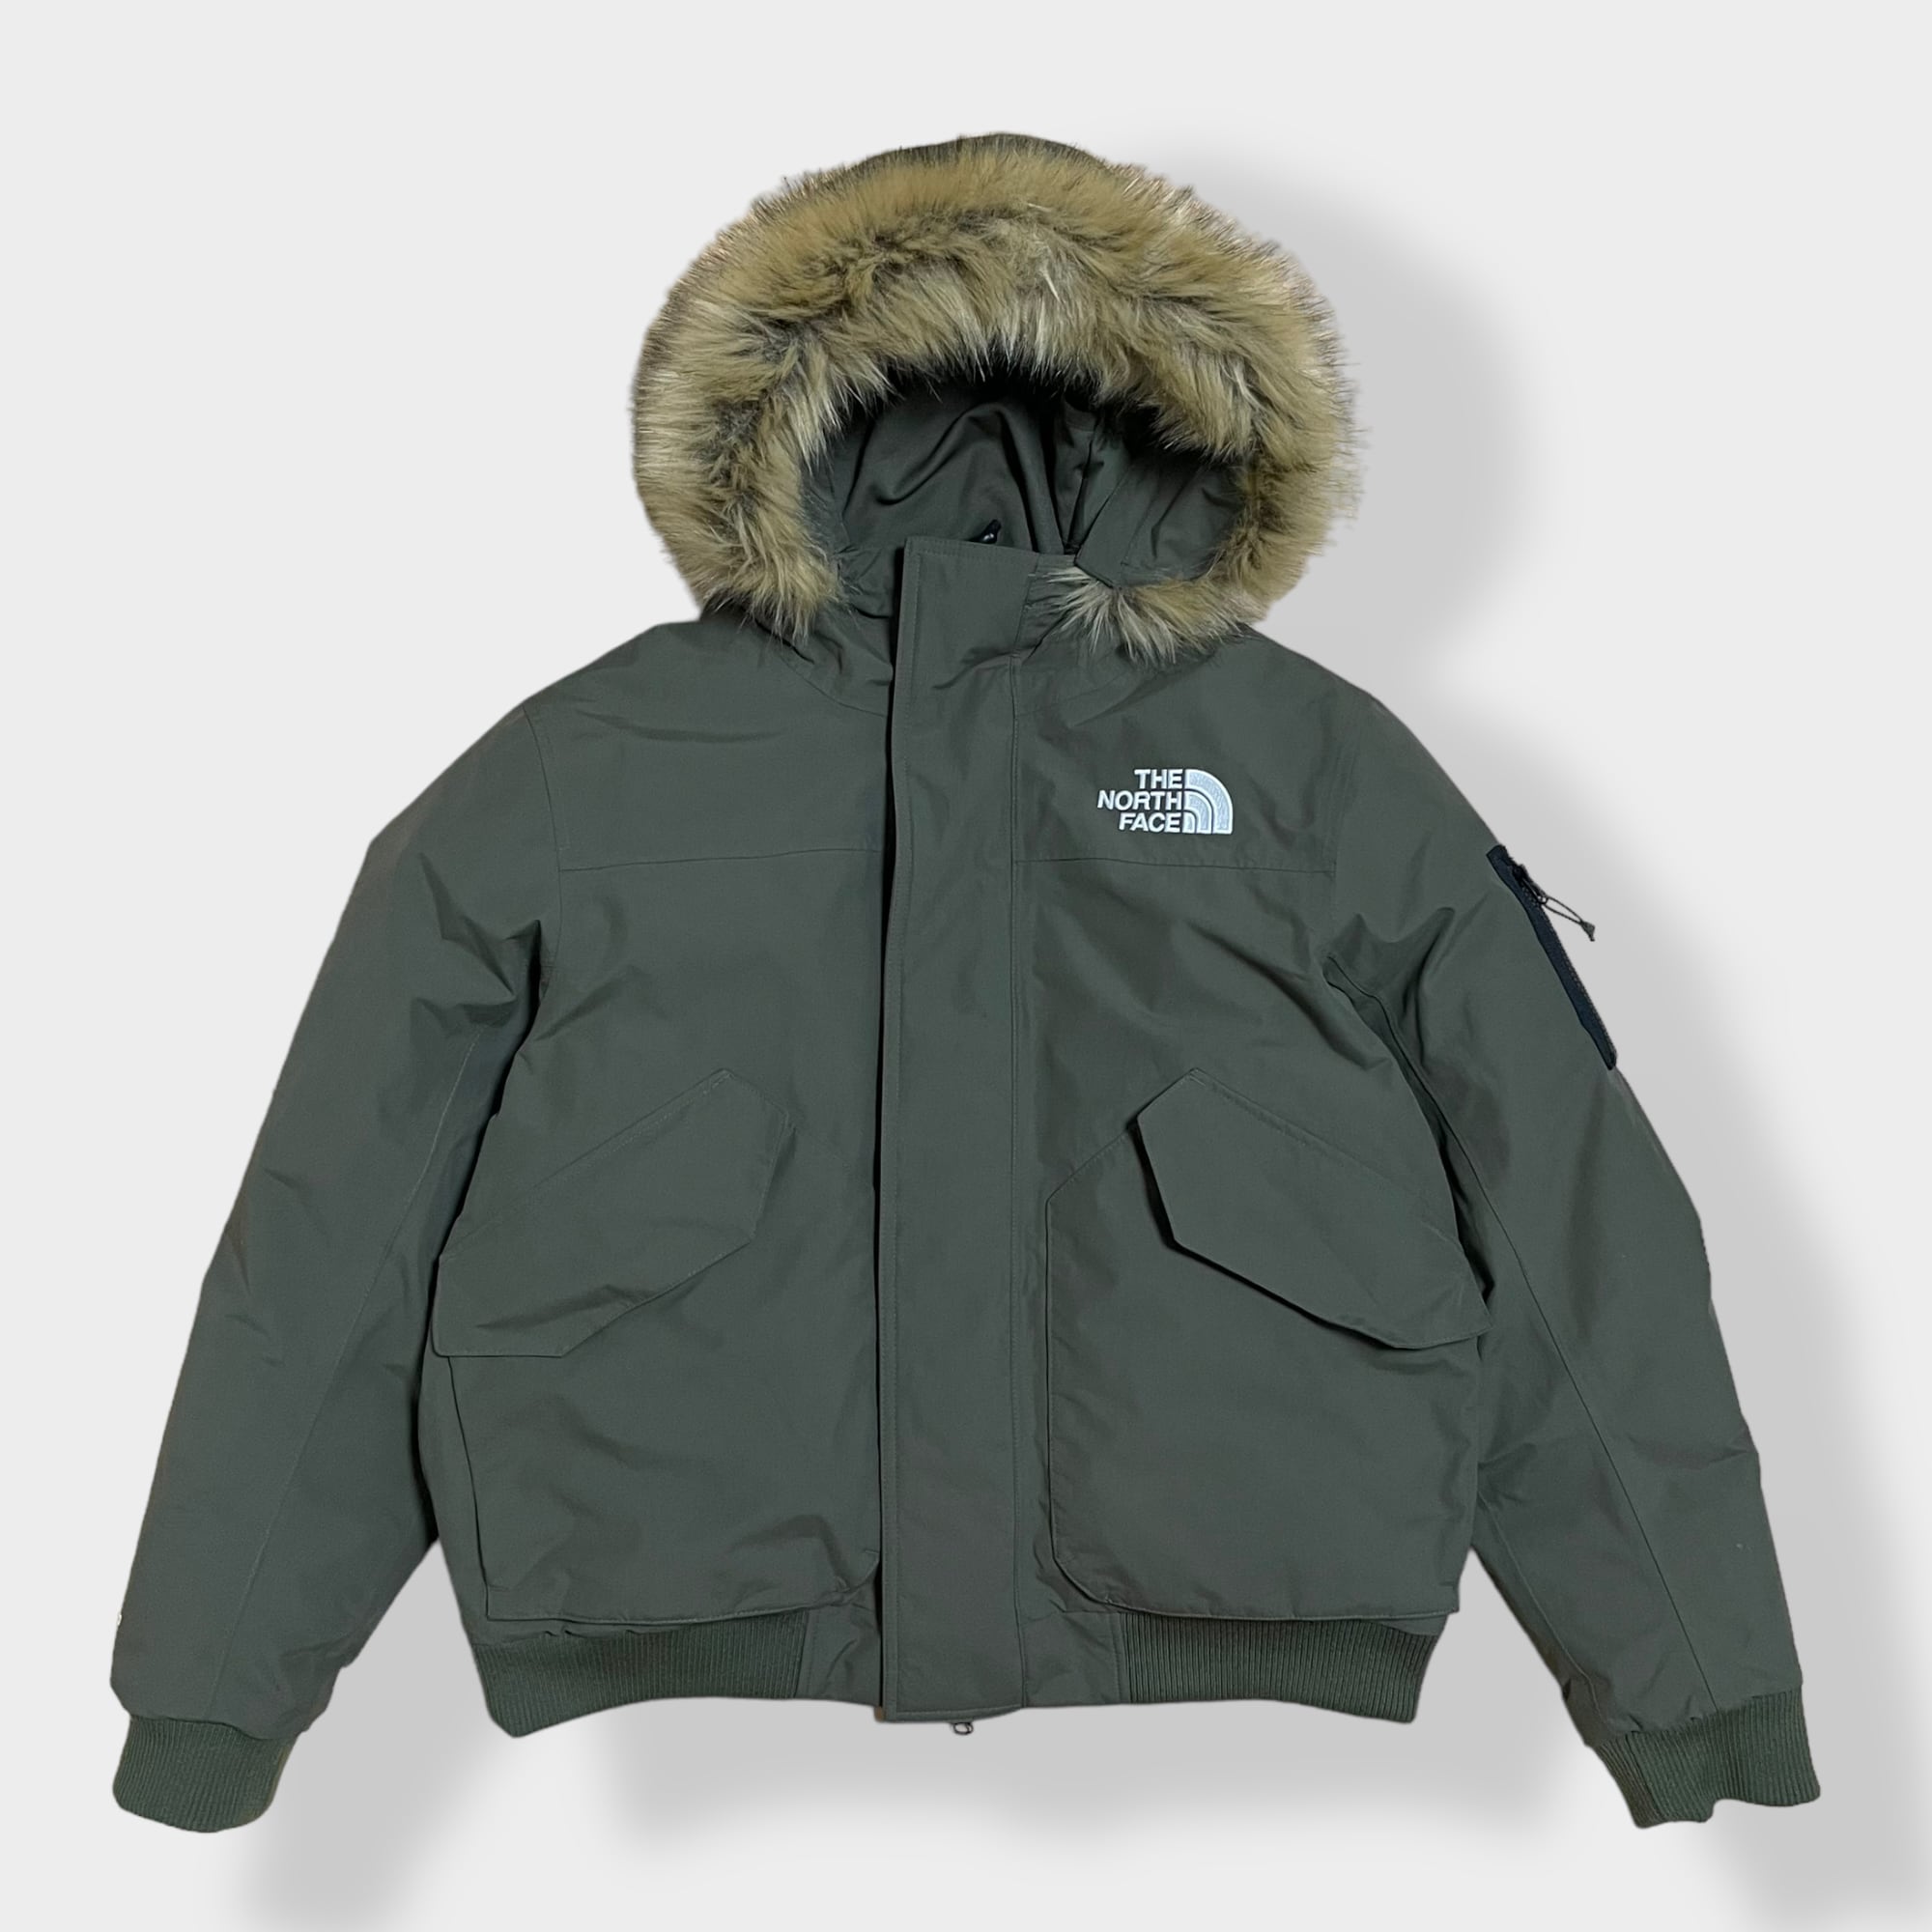 THE NORTH FACE】 STOVER JACKET グースダウン 550フィル US限定 日本